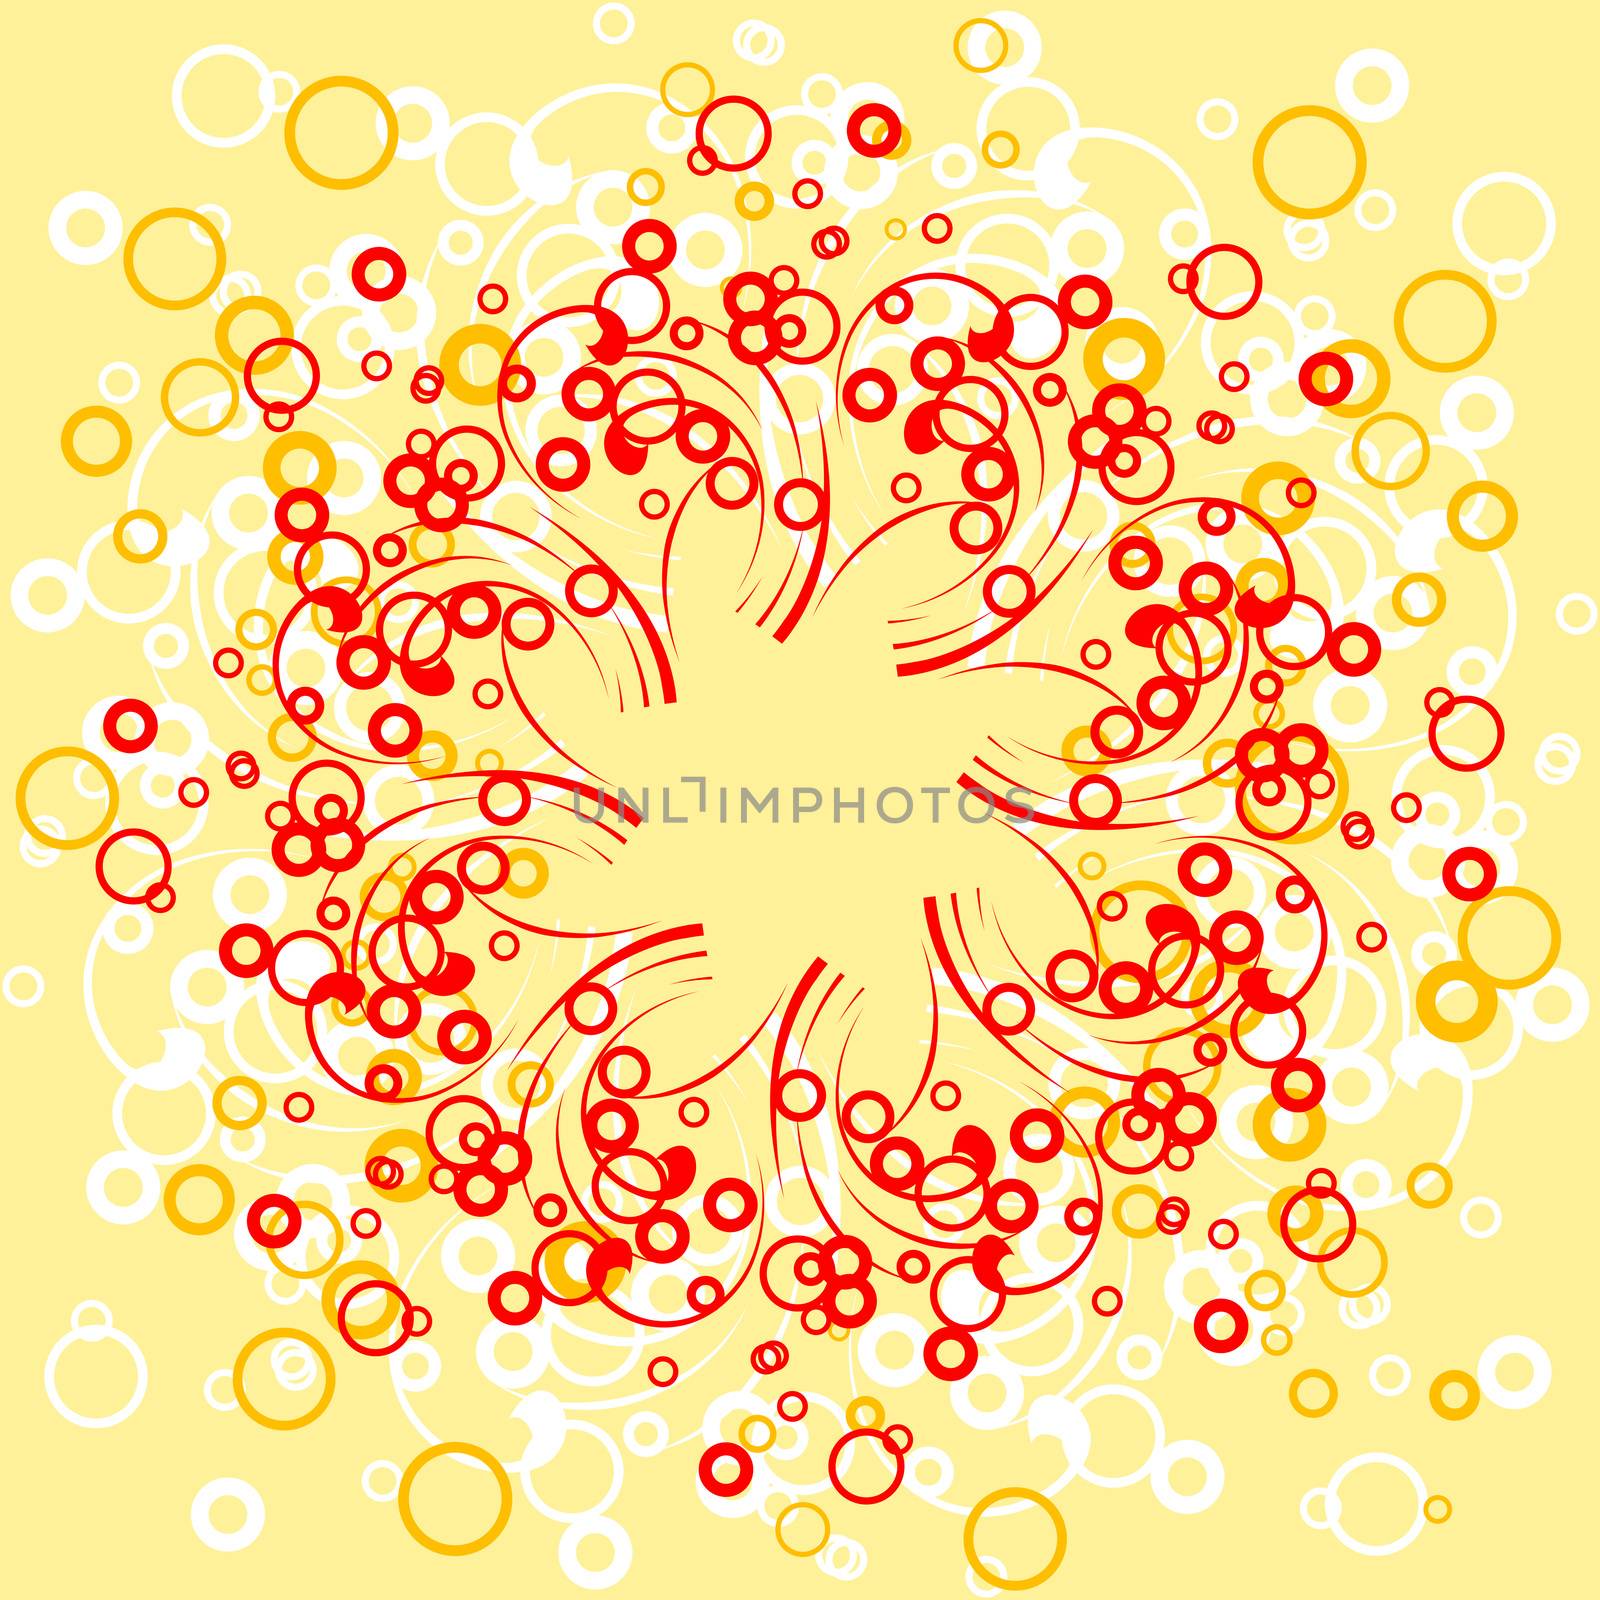 abstract background with circles and scrolls, vector illustration